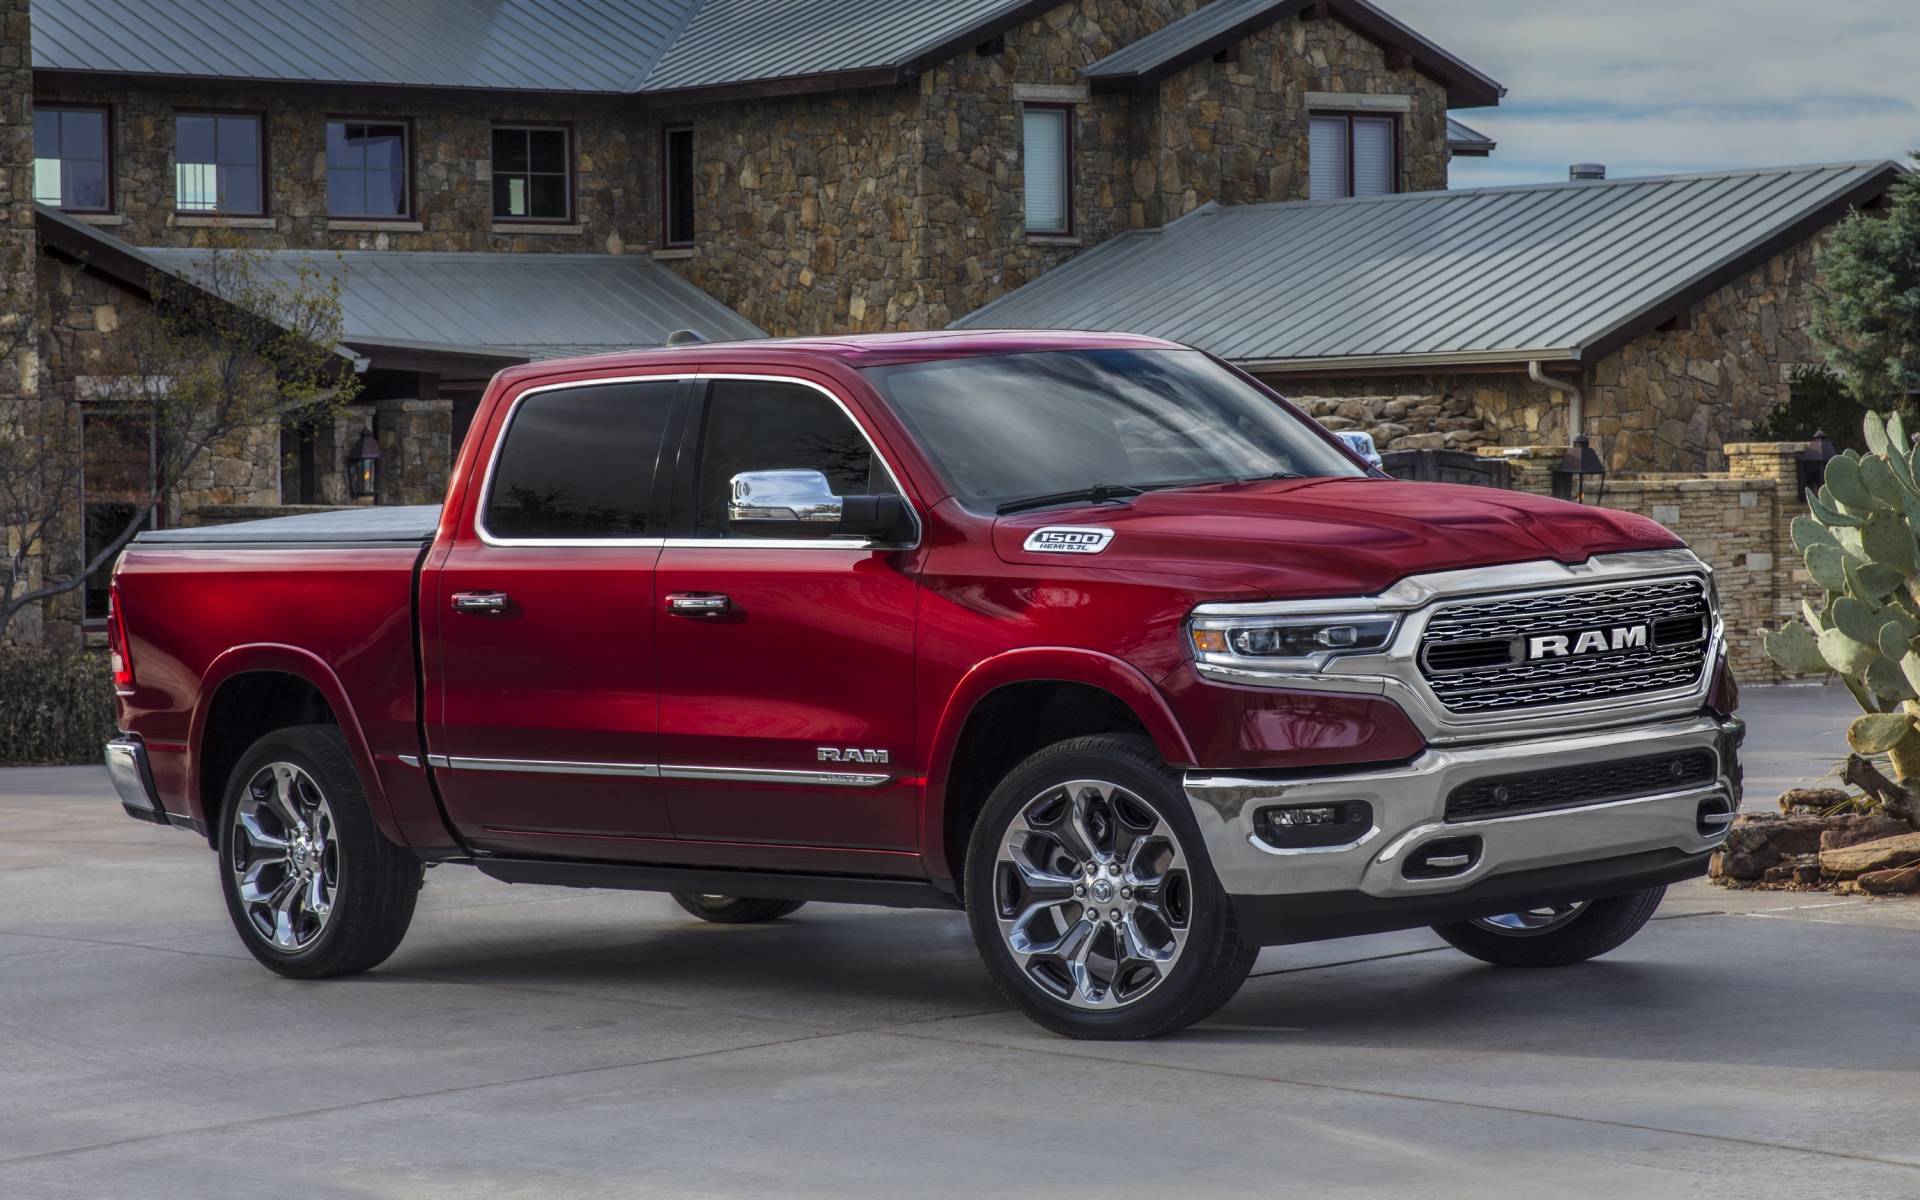 2020 Ram Sport Crew Cab 4x4 (5.6') Specifications The Car Guide